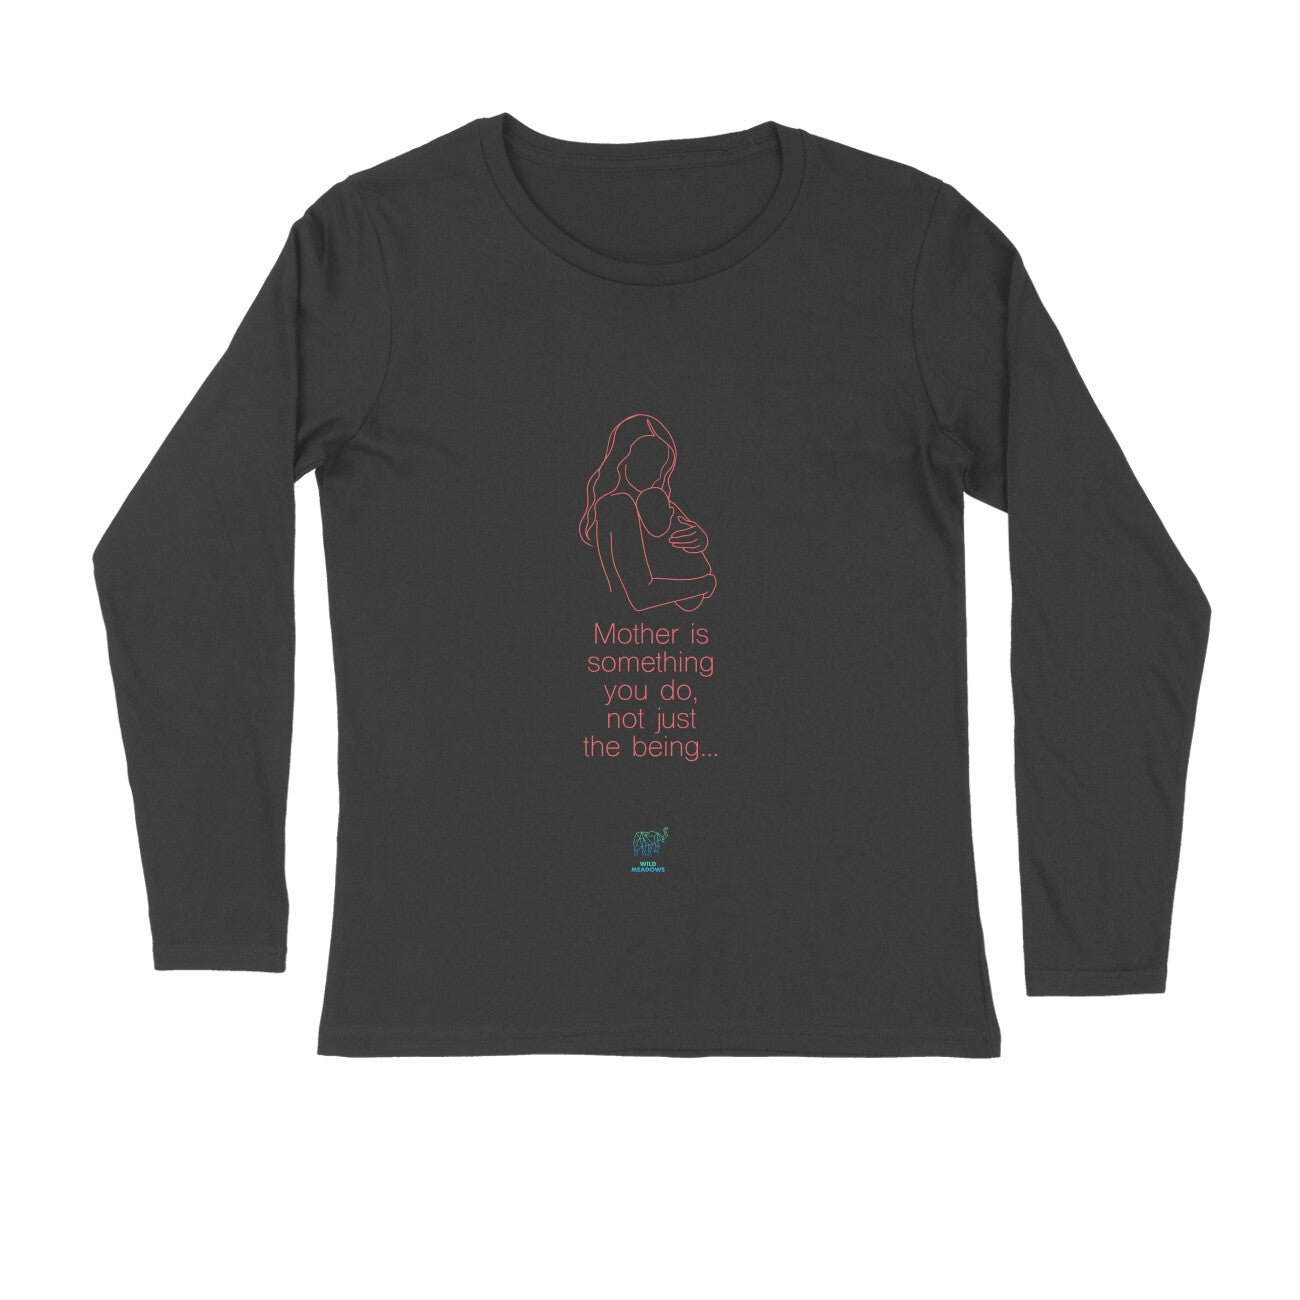 MOM - Mother is something you do, not just the being - Long Sleeve Round Neck Tee